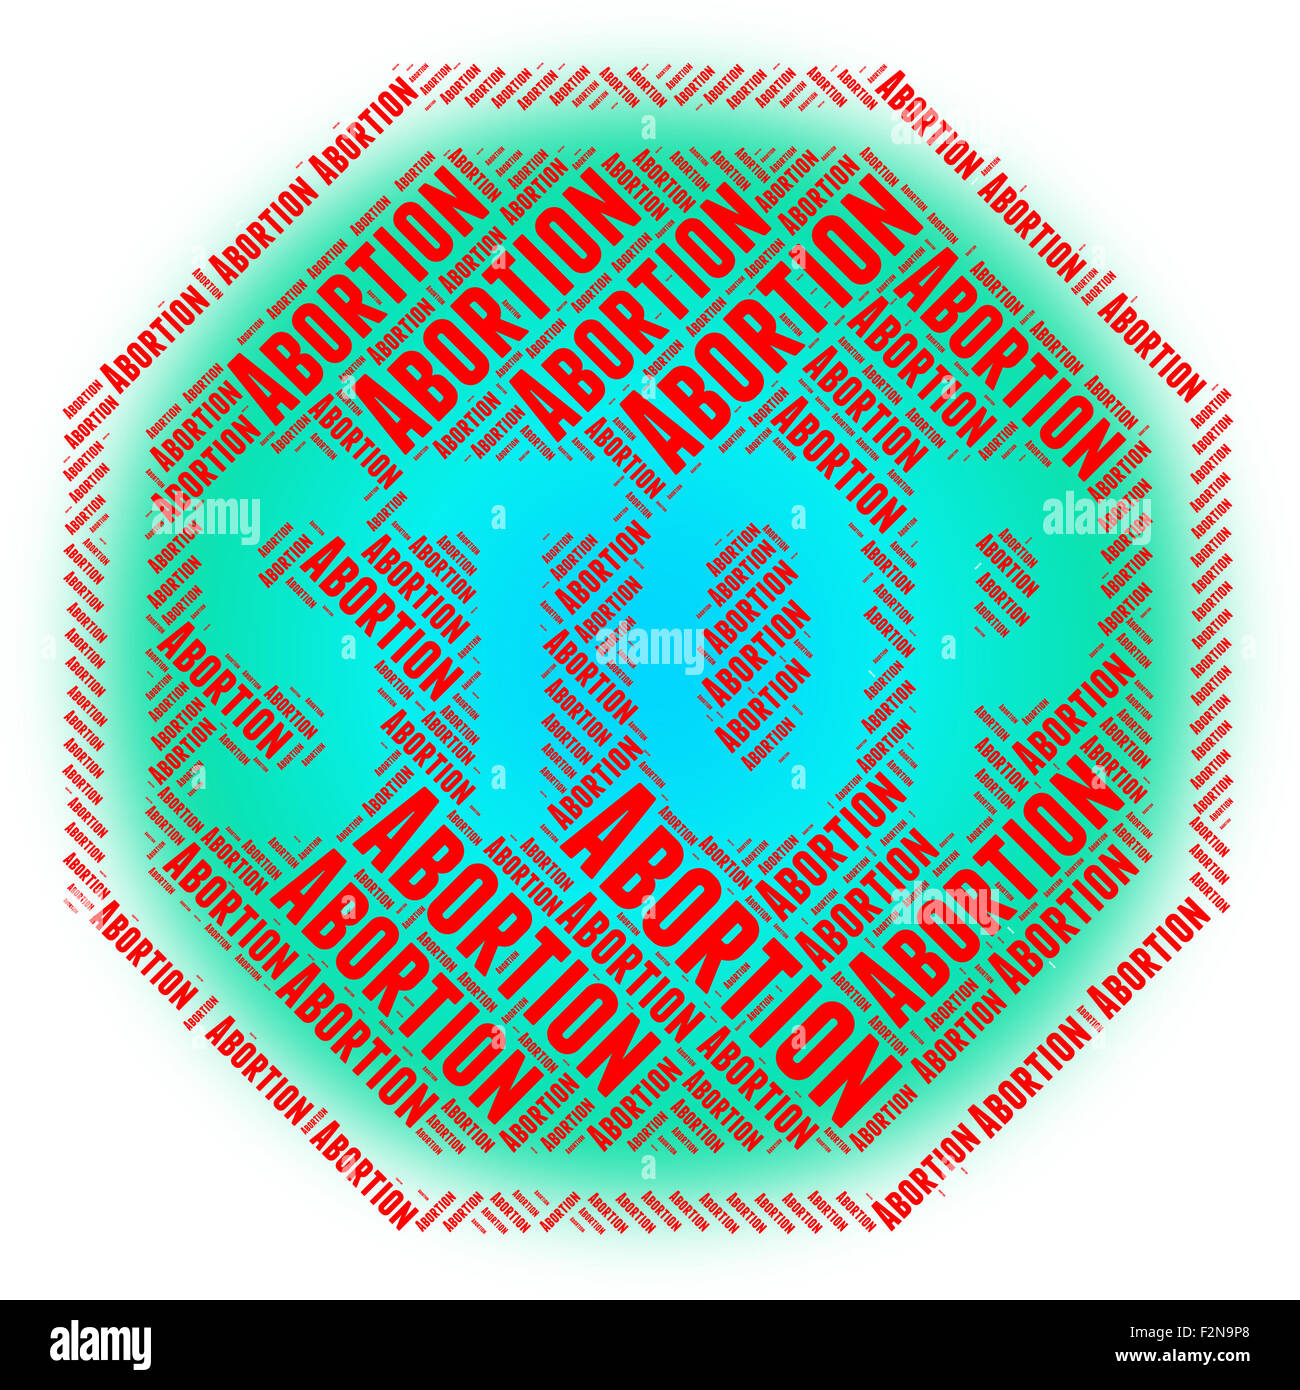 Stop Abortion Representing No Stopped And Danger Stock Photo